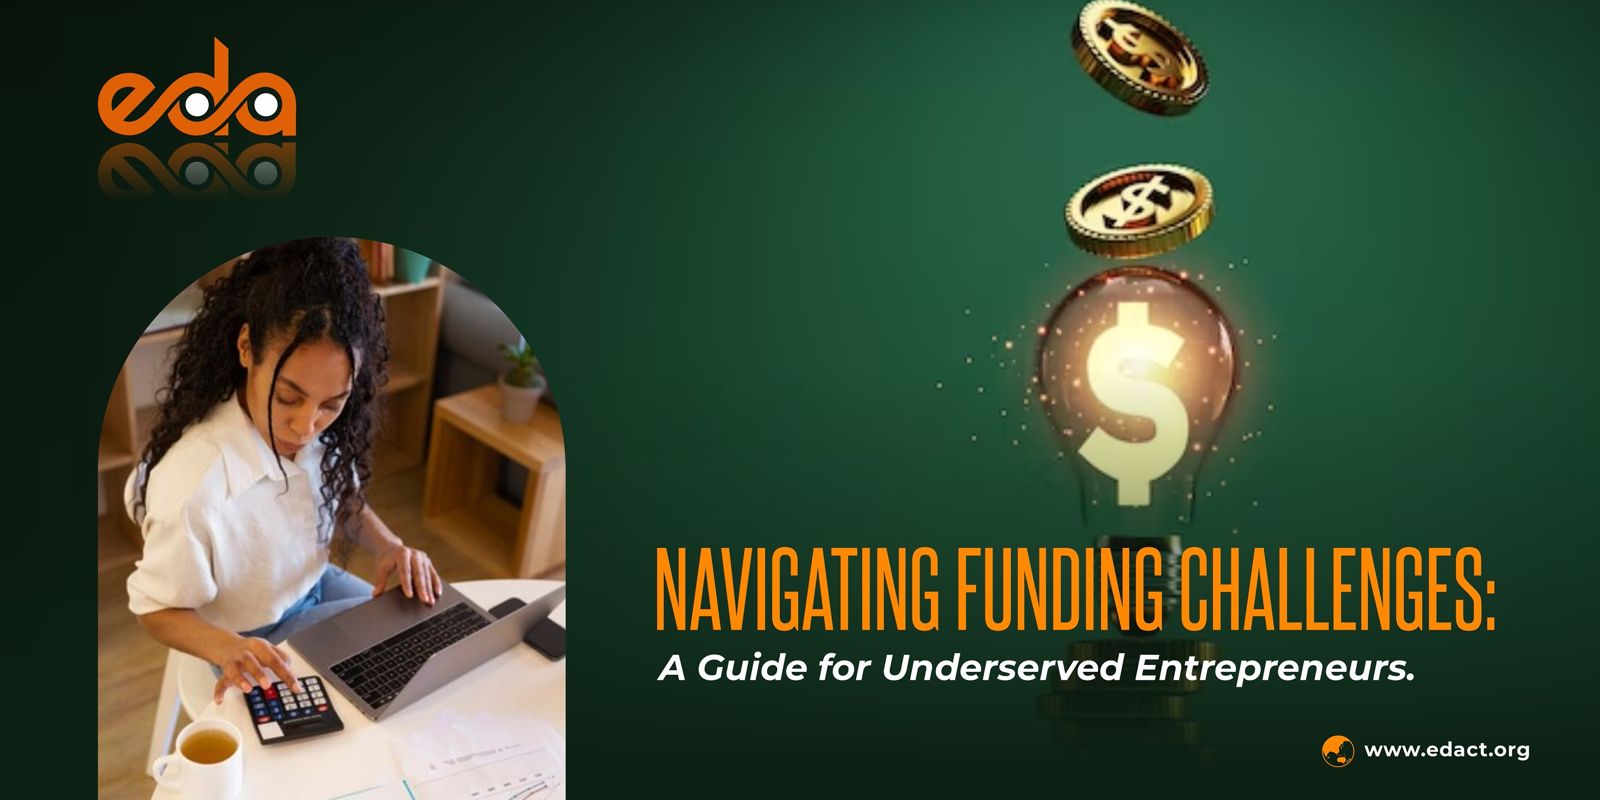 How To Navigate Funding Challenges As an Underserved Entrepreneur